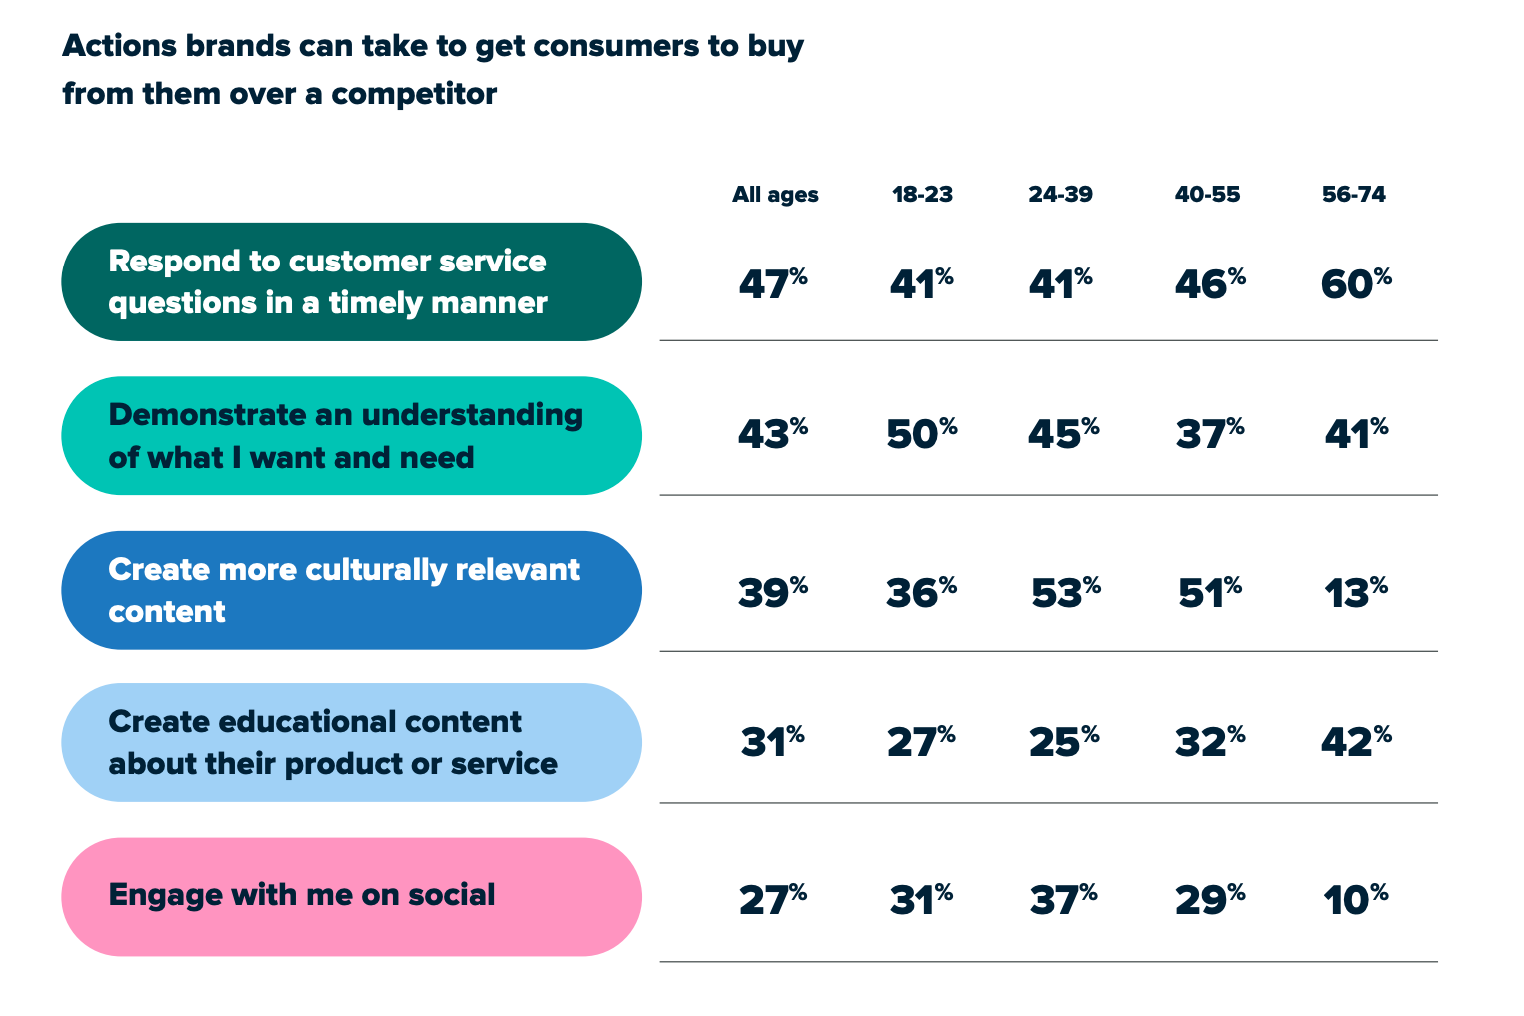 Actions brands can take to get consumers to buy from them